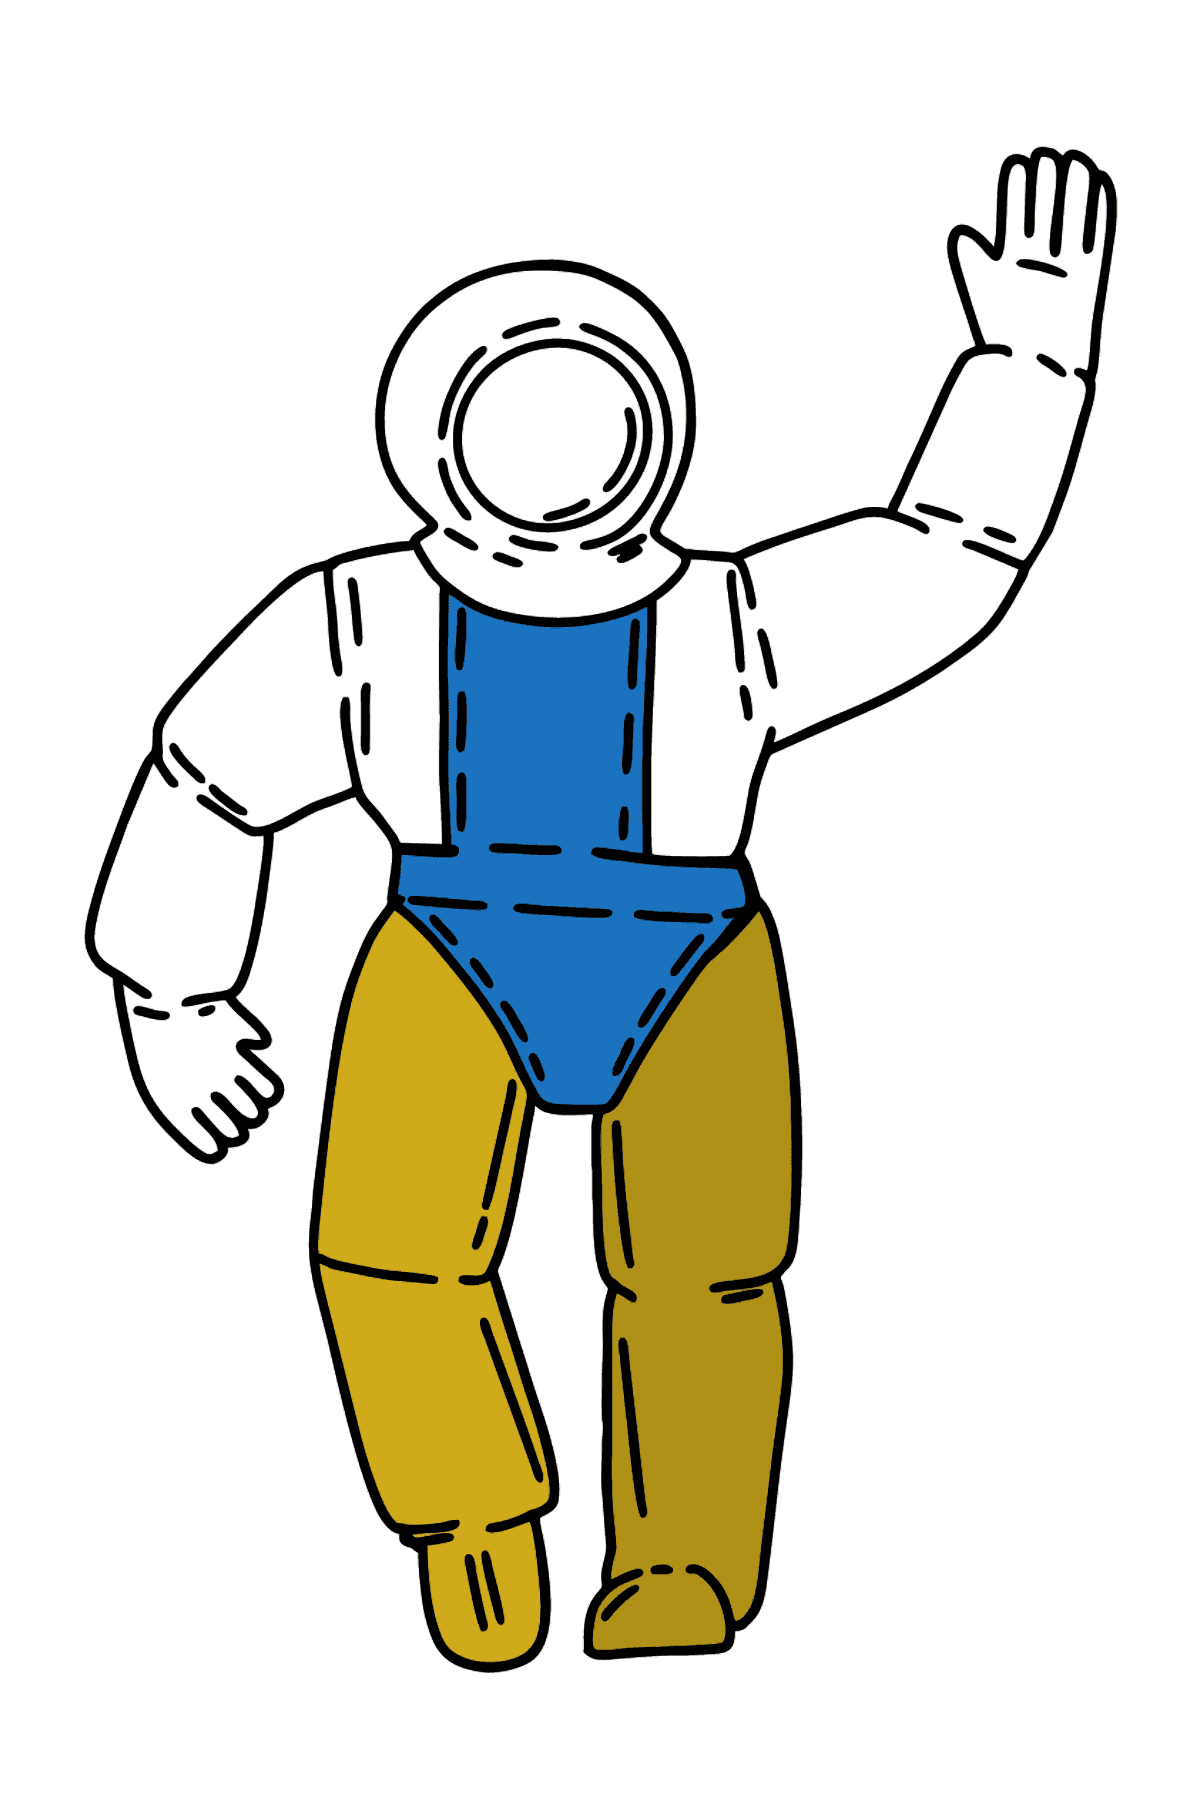 Astronaut coloring page - Coloring Pages for Kids